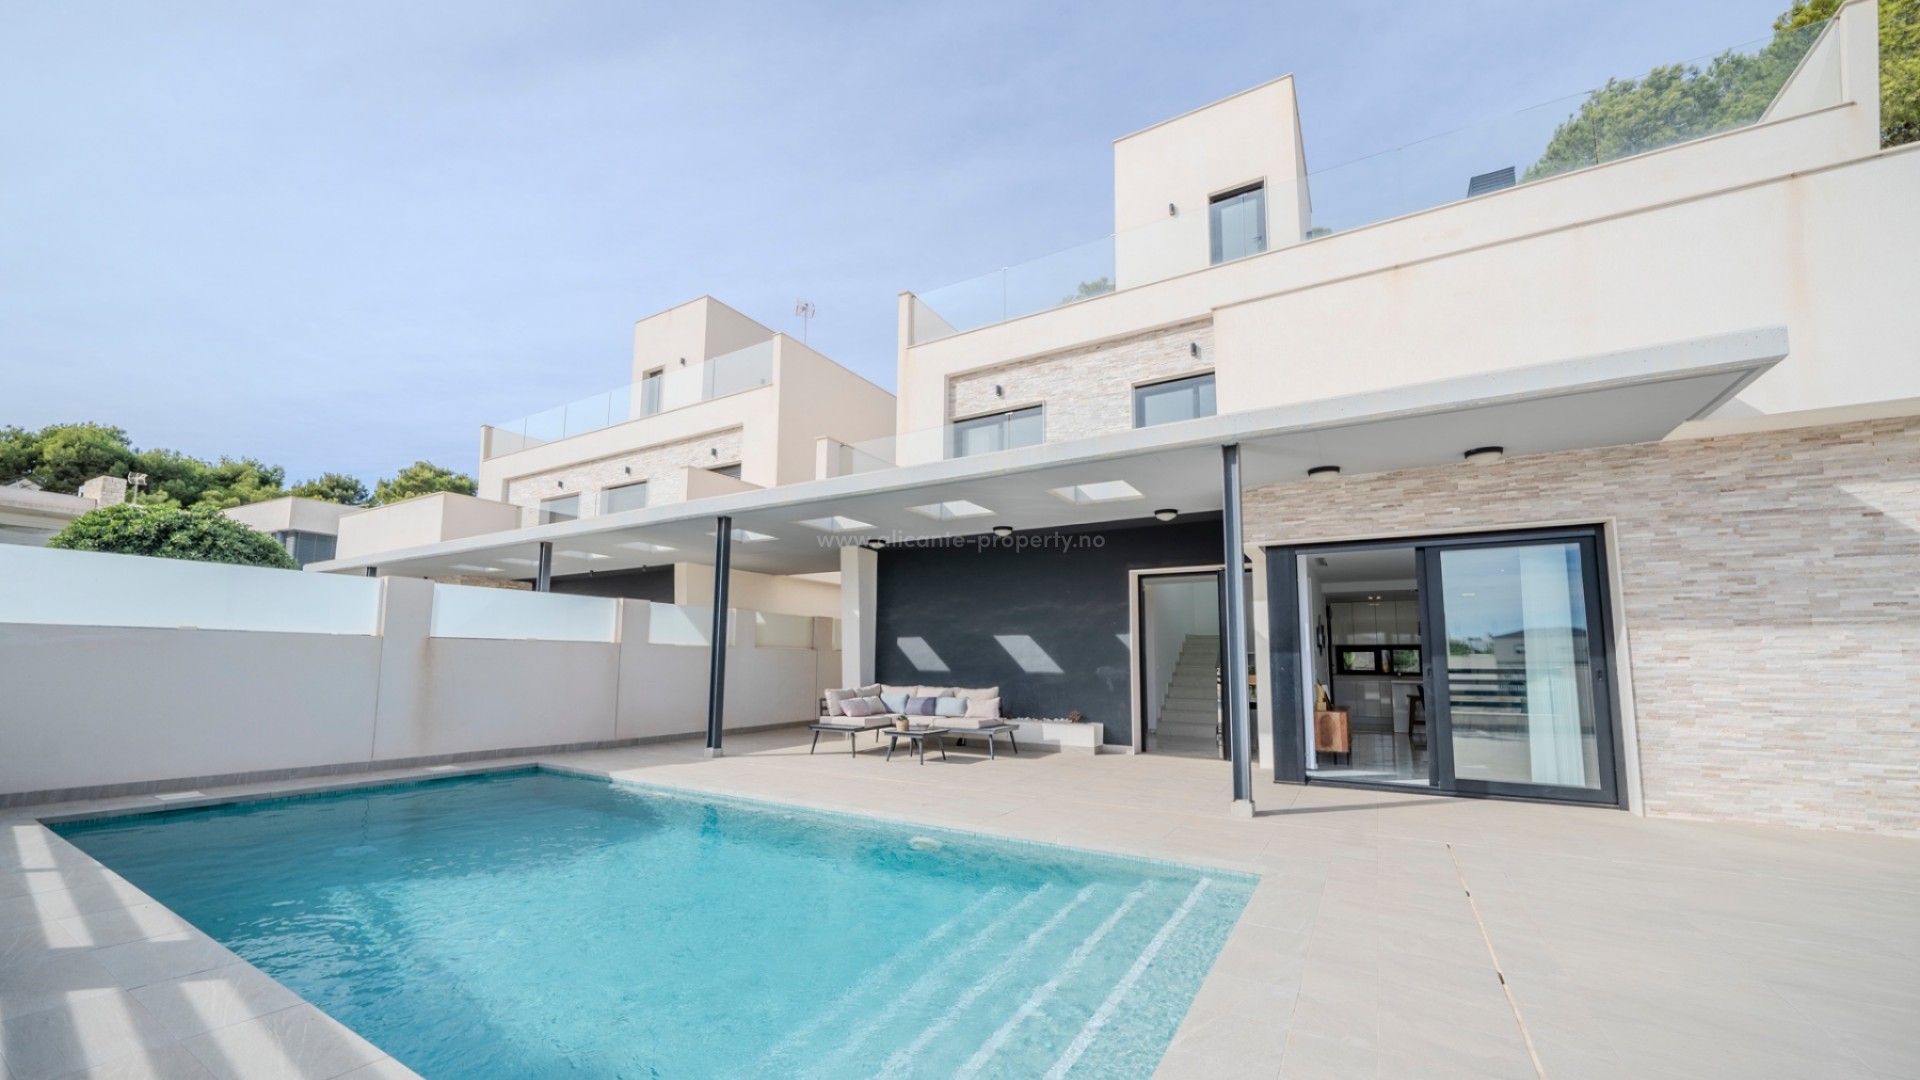 Modern villa with 5 bedrooms and 4 bathrooms in the upper part of Los Balcones, private pool and several south-facing terraces and incredible views